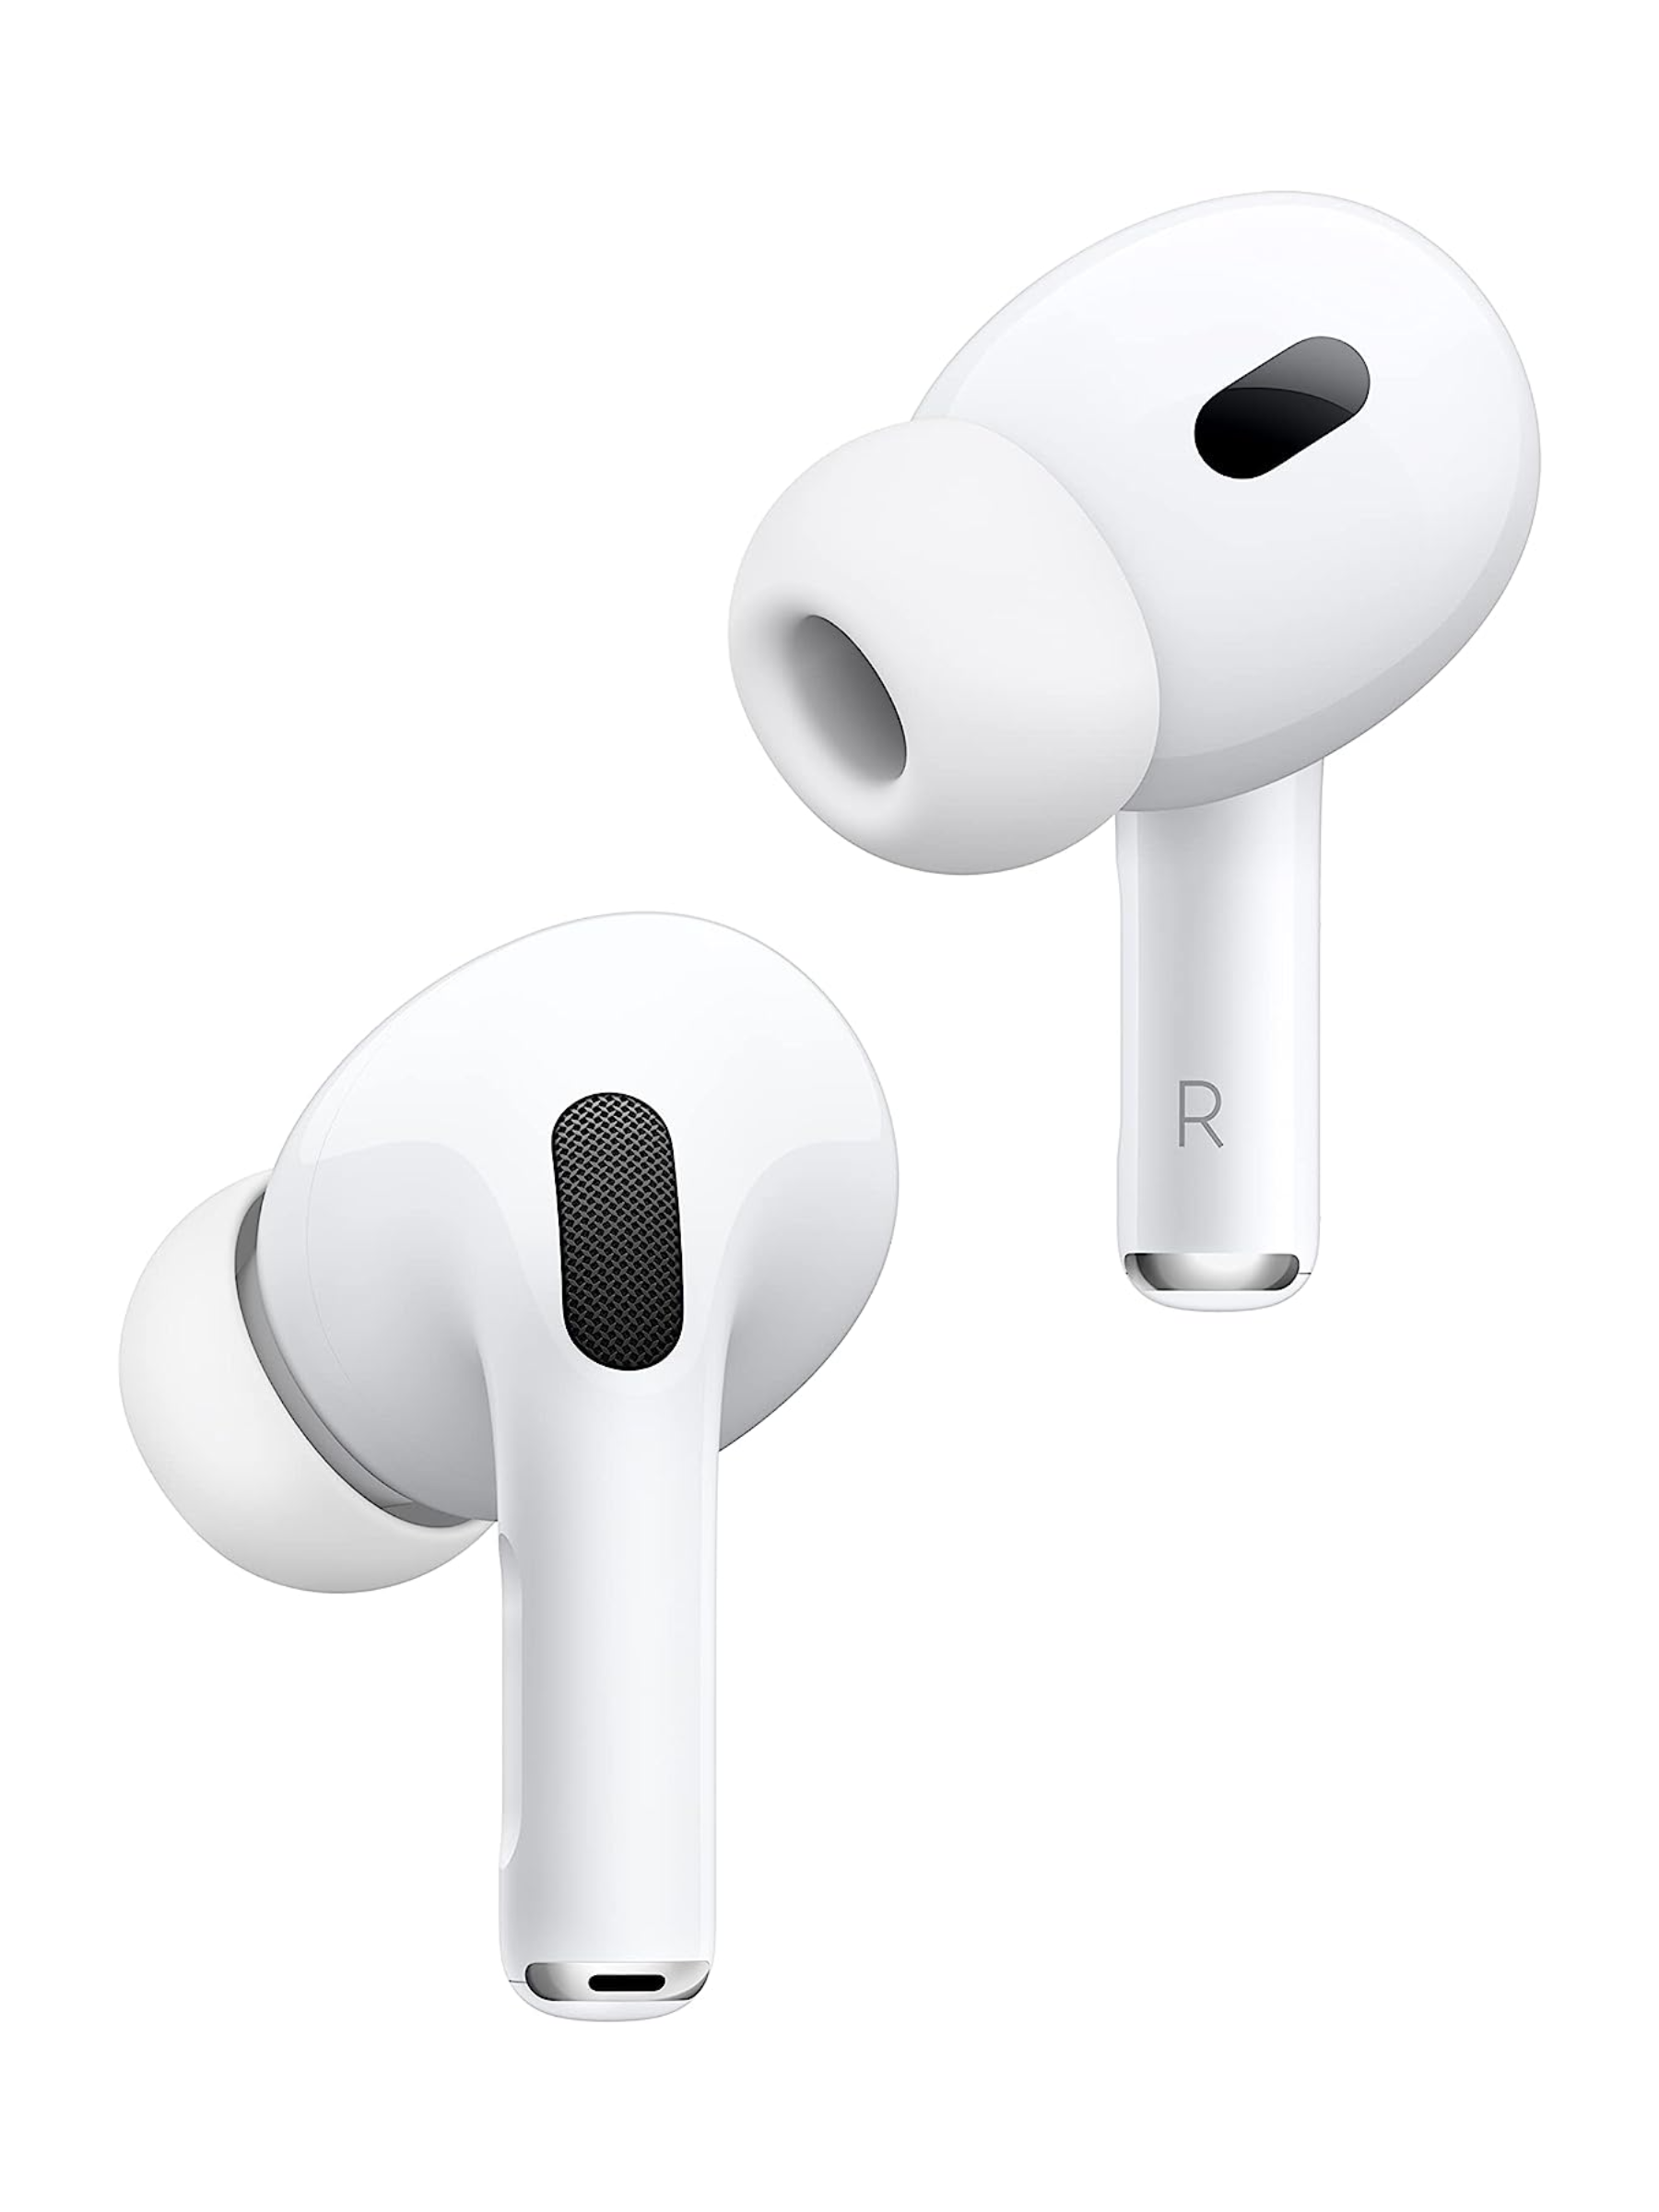 By 18 they’ve most likely proven that they’re responsible enough to keep track of earbuds. This second-generation pair has more advanced noise cancelling so they can zone out when it’s time to study. $249, Amazon. <a href="https://www.amazon.com/dp/B0CHWRXH8B?">Get it now!</a><p>Sign up for today’s biggest stories, from pop culture to politics.</p><a href="https://www.glamour.com/newsletter/news?sourceCode=msnsend">Sign Up</a>